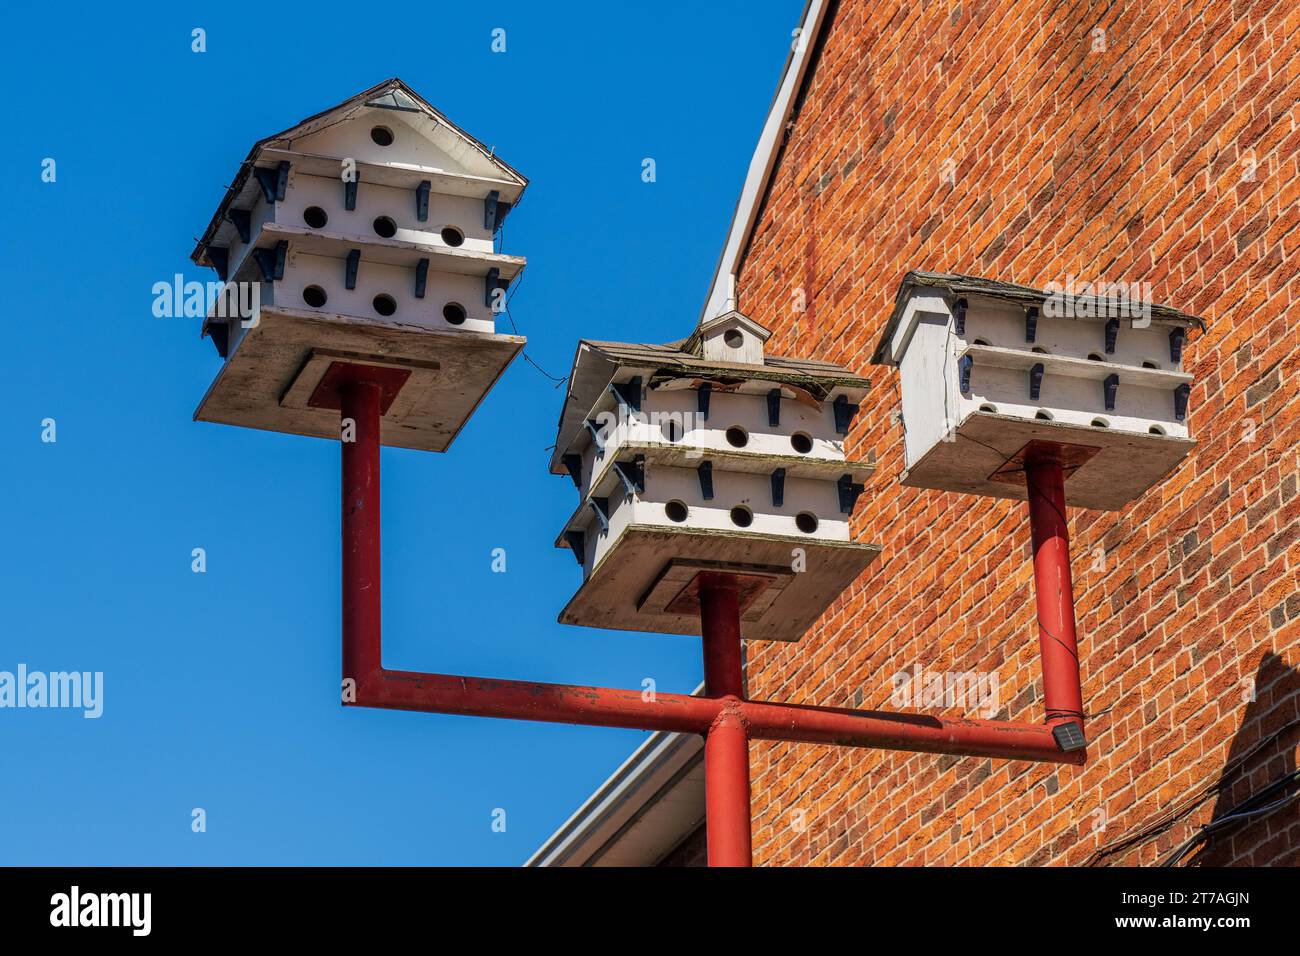 multi story bird houses on a post next to a red brick house Purple Martins nest in colonies and prefer houses with multiple rooms Stock Photo